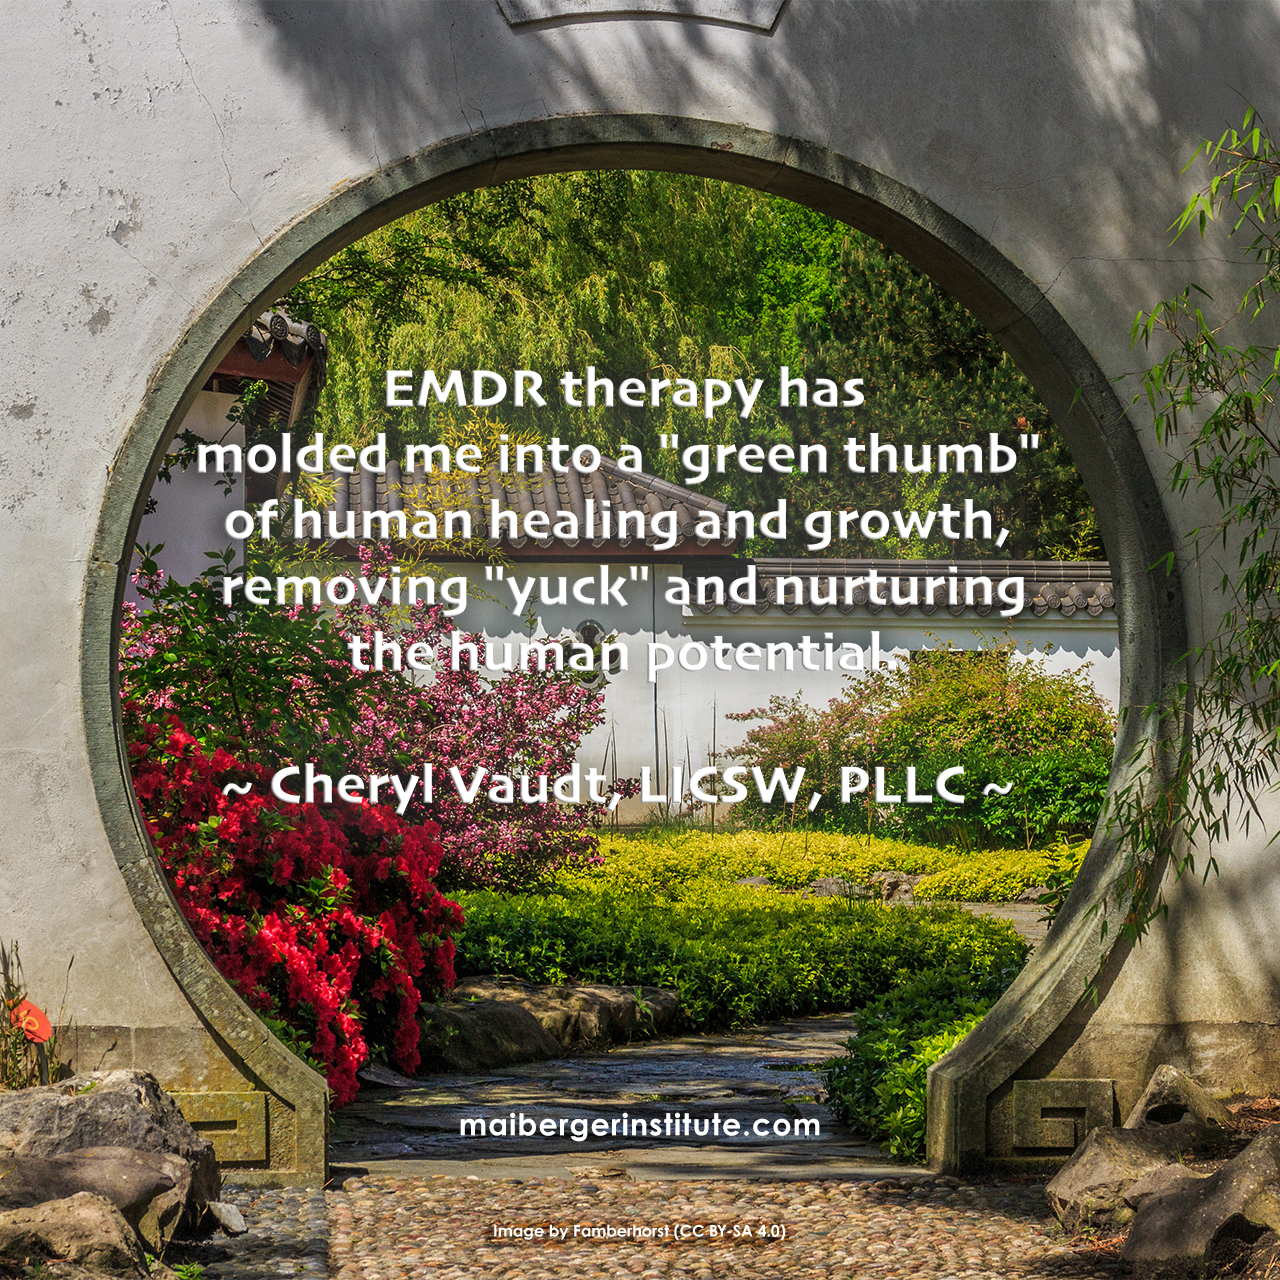 EMDR therapy has molded me into a "green thumb" of human healing and growth, removing "yuck" and nurturing the human potential. ~ Cheryl Vaudt, LICSW, PLLC